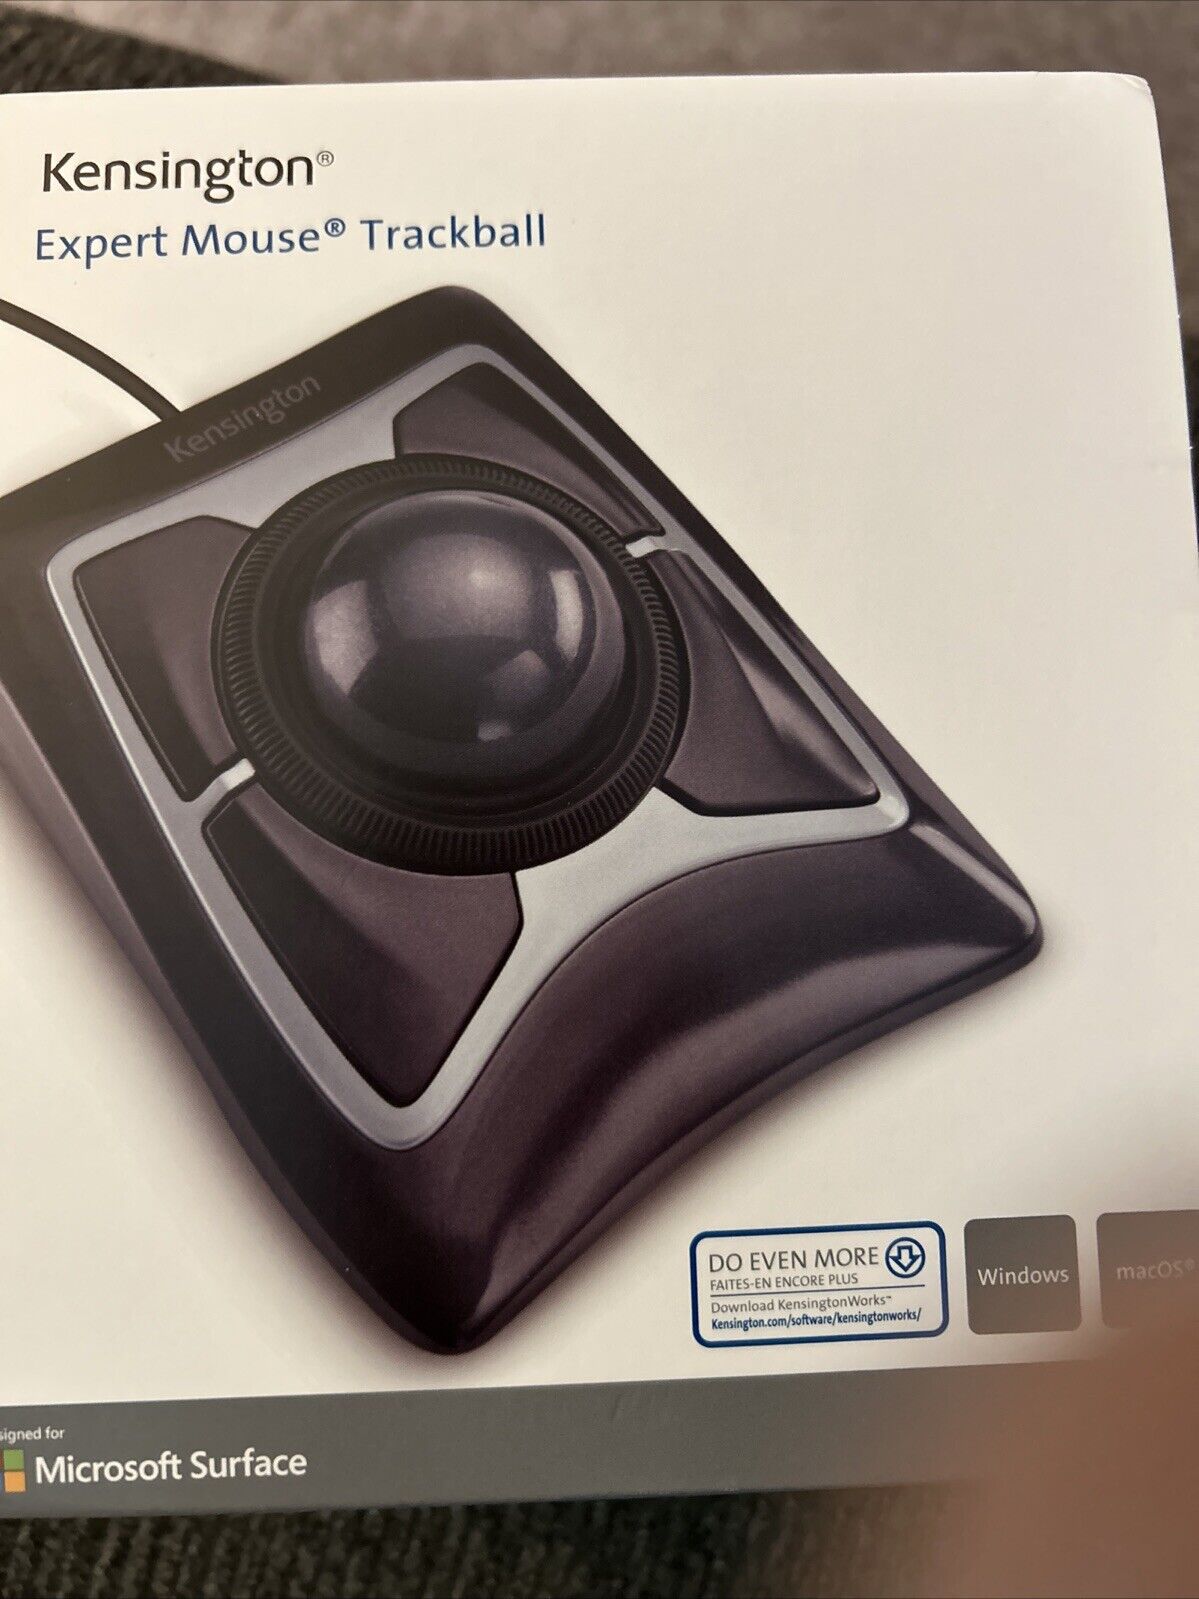 Kensington Expert Trackball Mouse, Wired, A12315D, More Accurate, Comfortable.